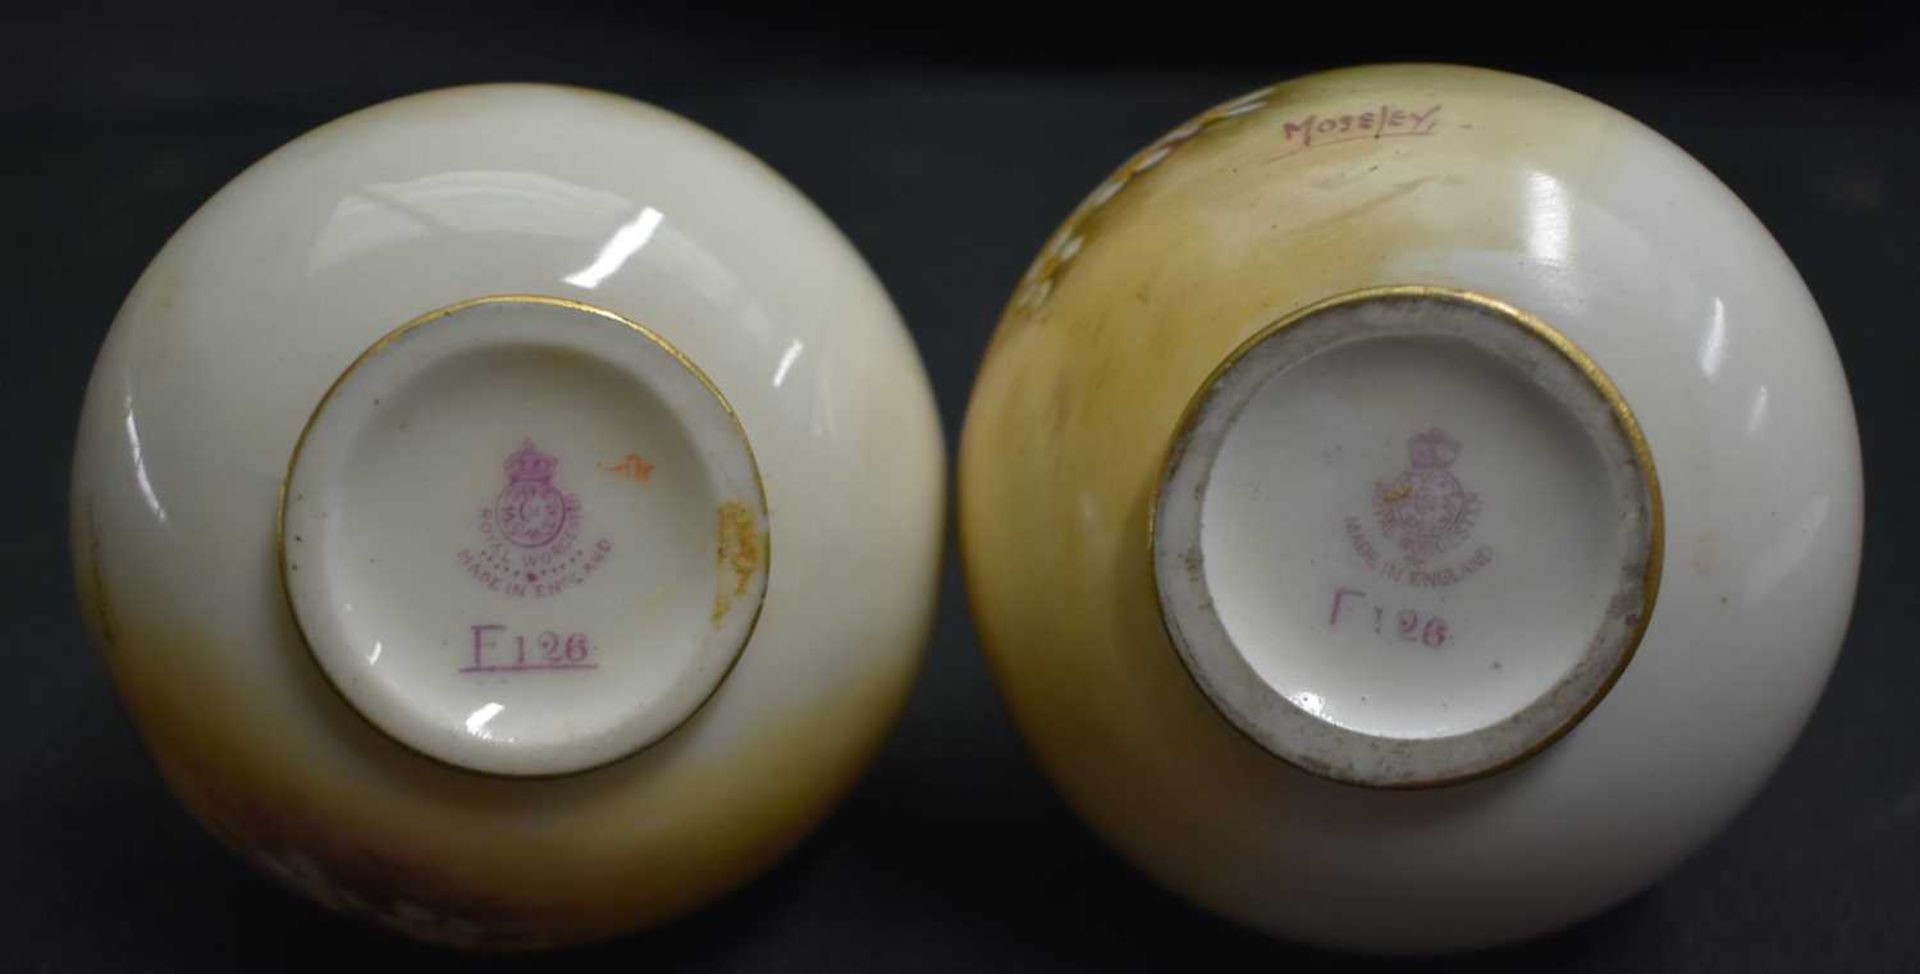 A PAIR OF ROYAL WORCESTER FRUIT PAINTED PORCELAIN VASES by Moseley & Townsend. 13 cm x 8 cm. - Image 6 of 6